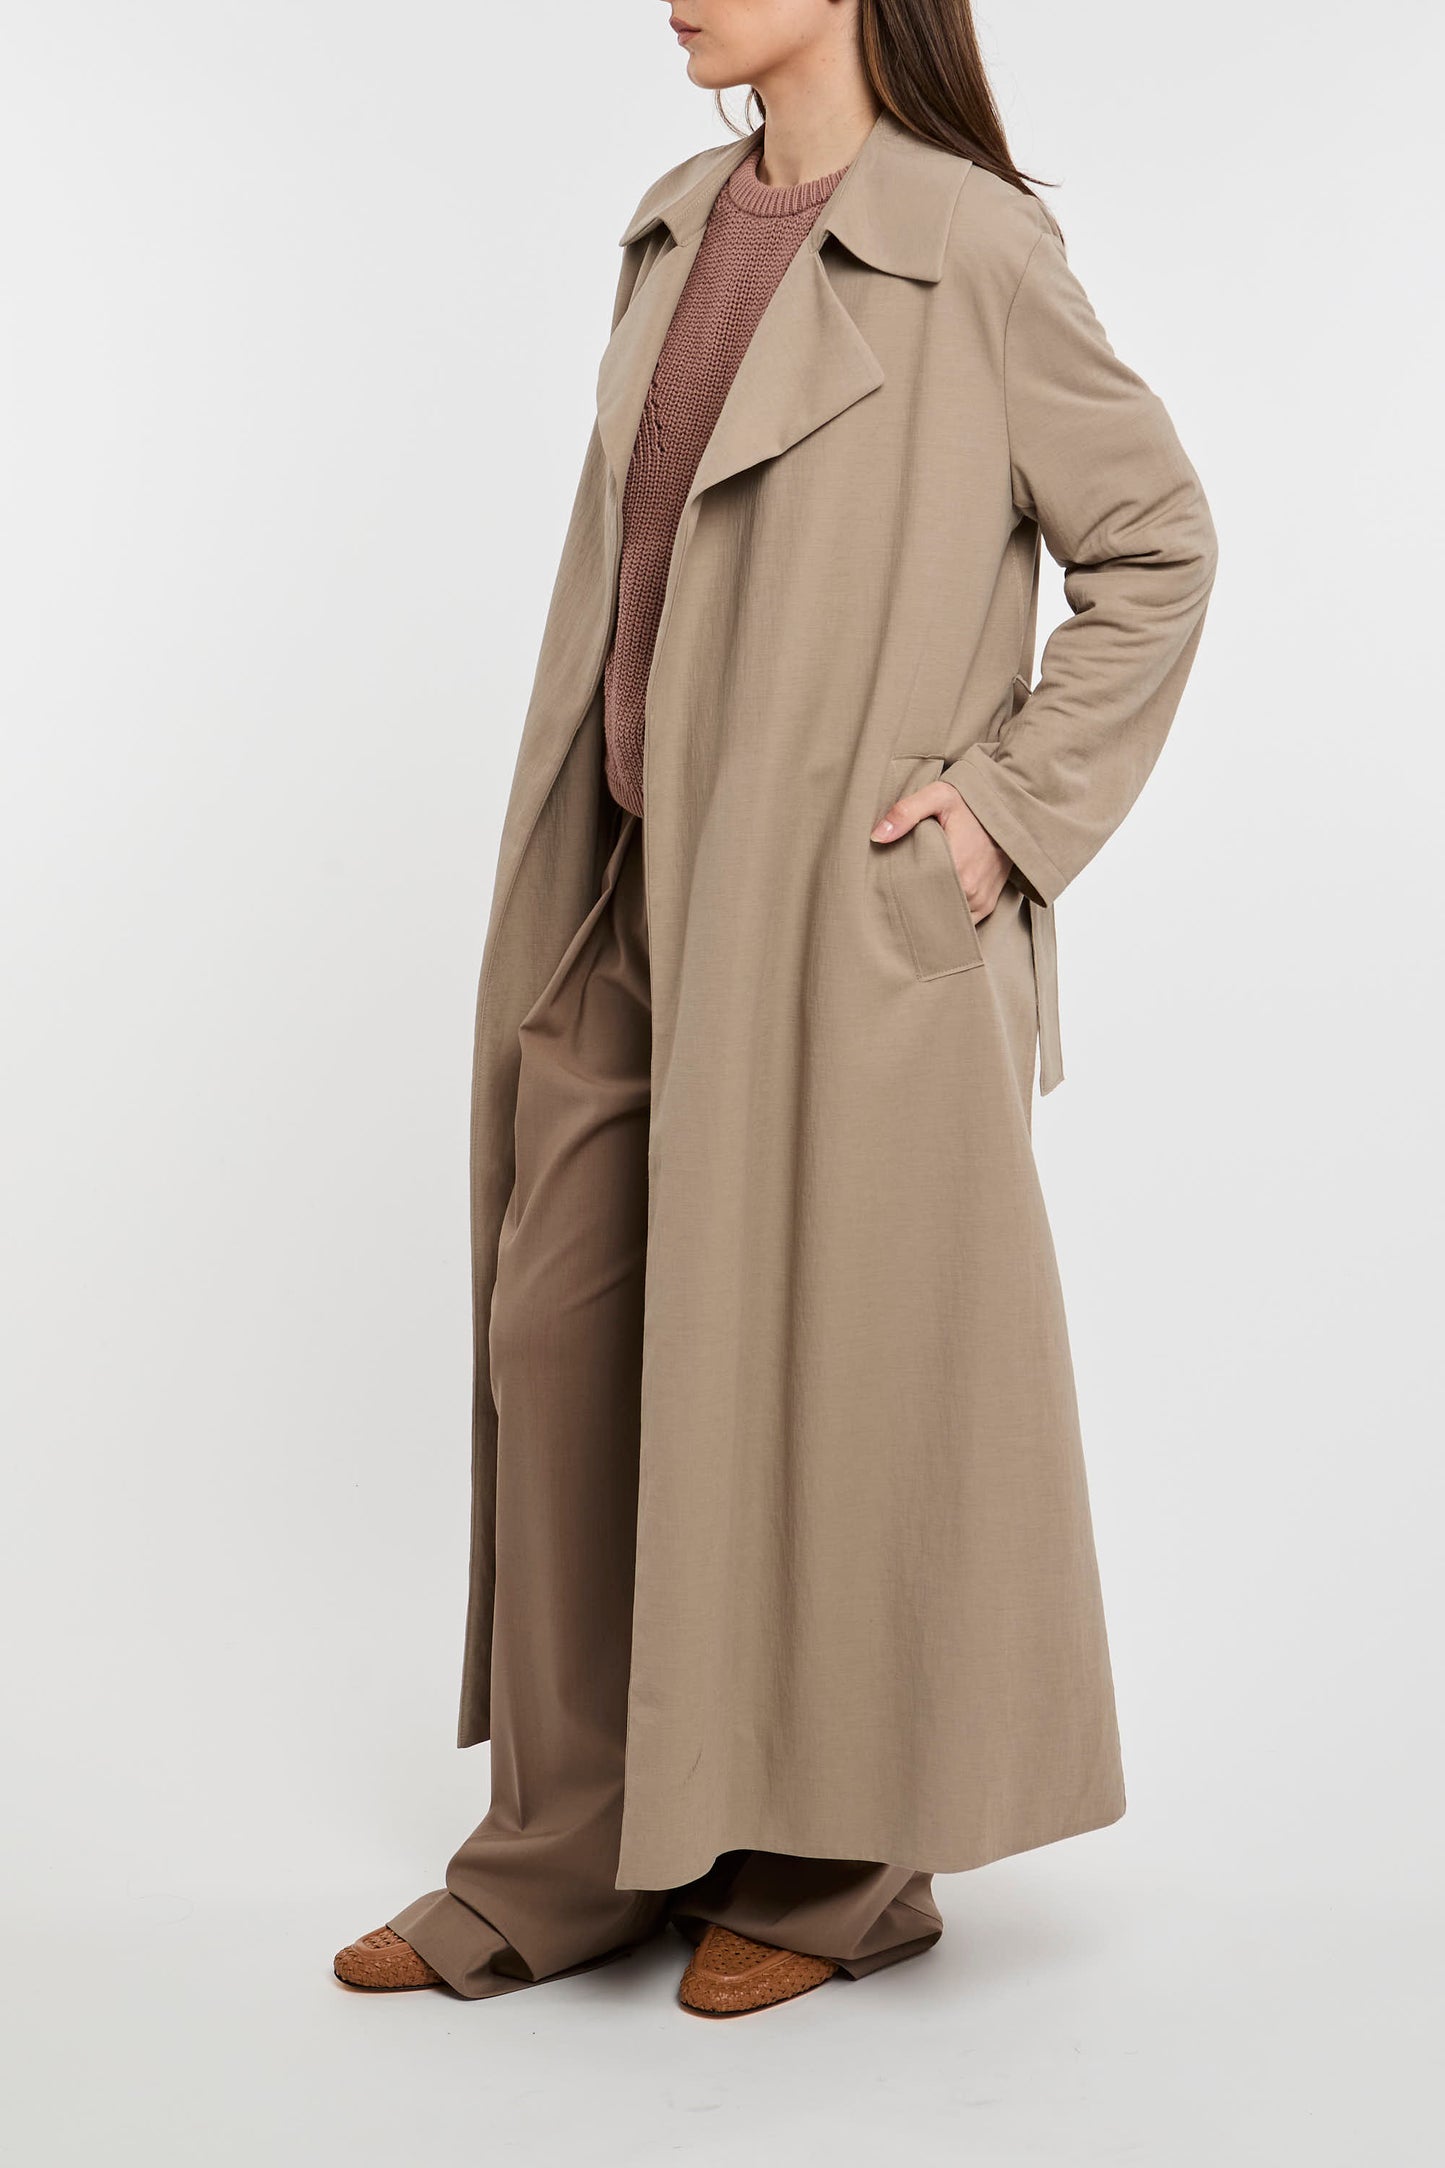  Harris Wharf London Trench Rayon/poliestere Multicolor Beige Donna - 3